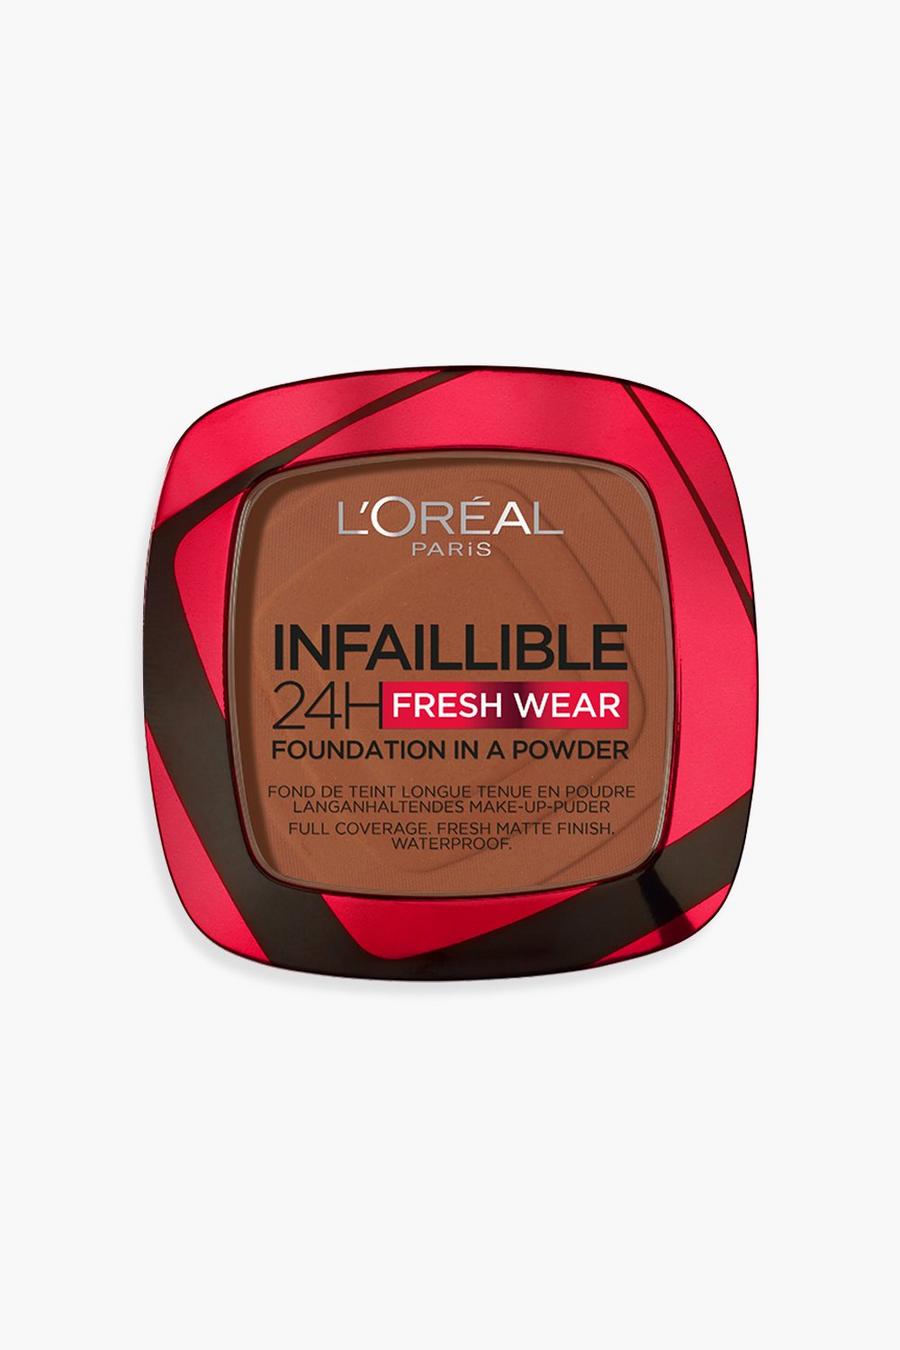 L'Oréal Paris Infallible 24H Fresh Wear Foundation in a Powder, Shade 375 Deep Amber image number 1